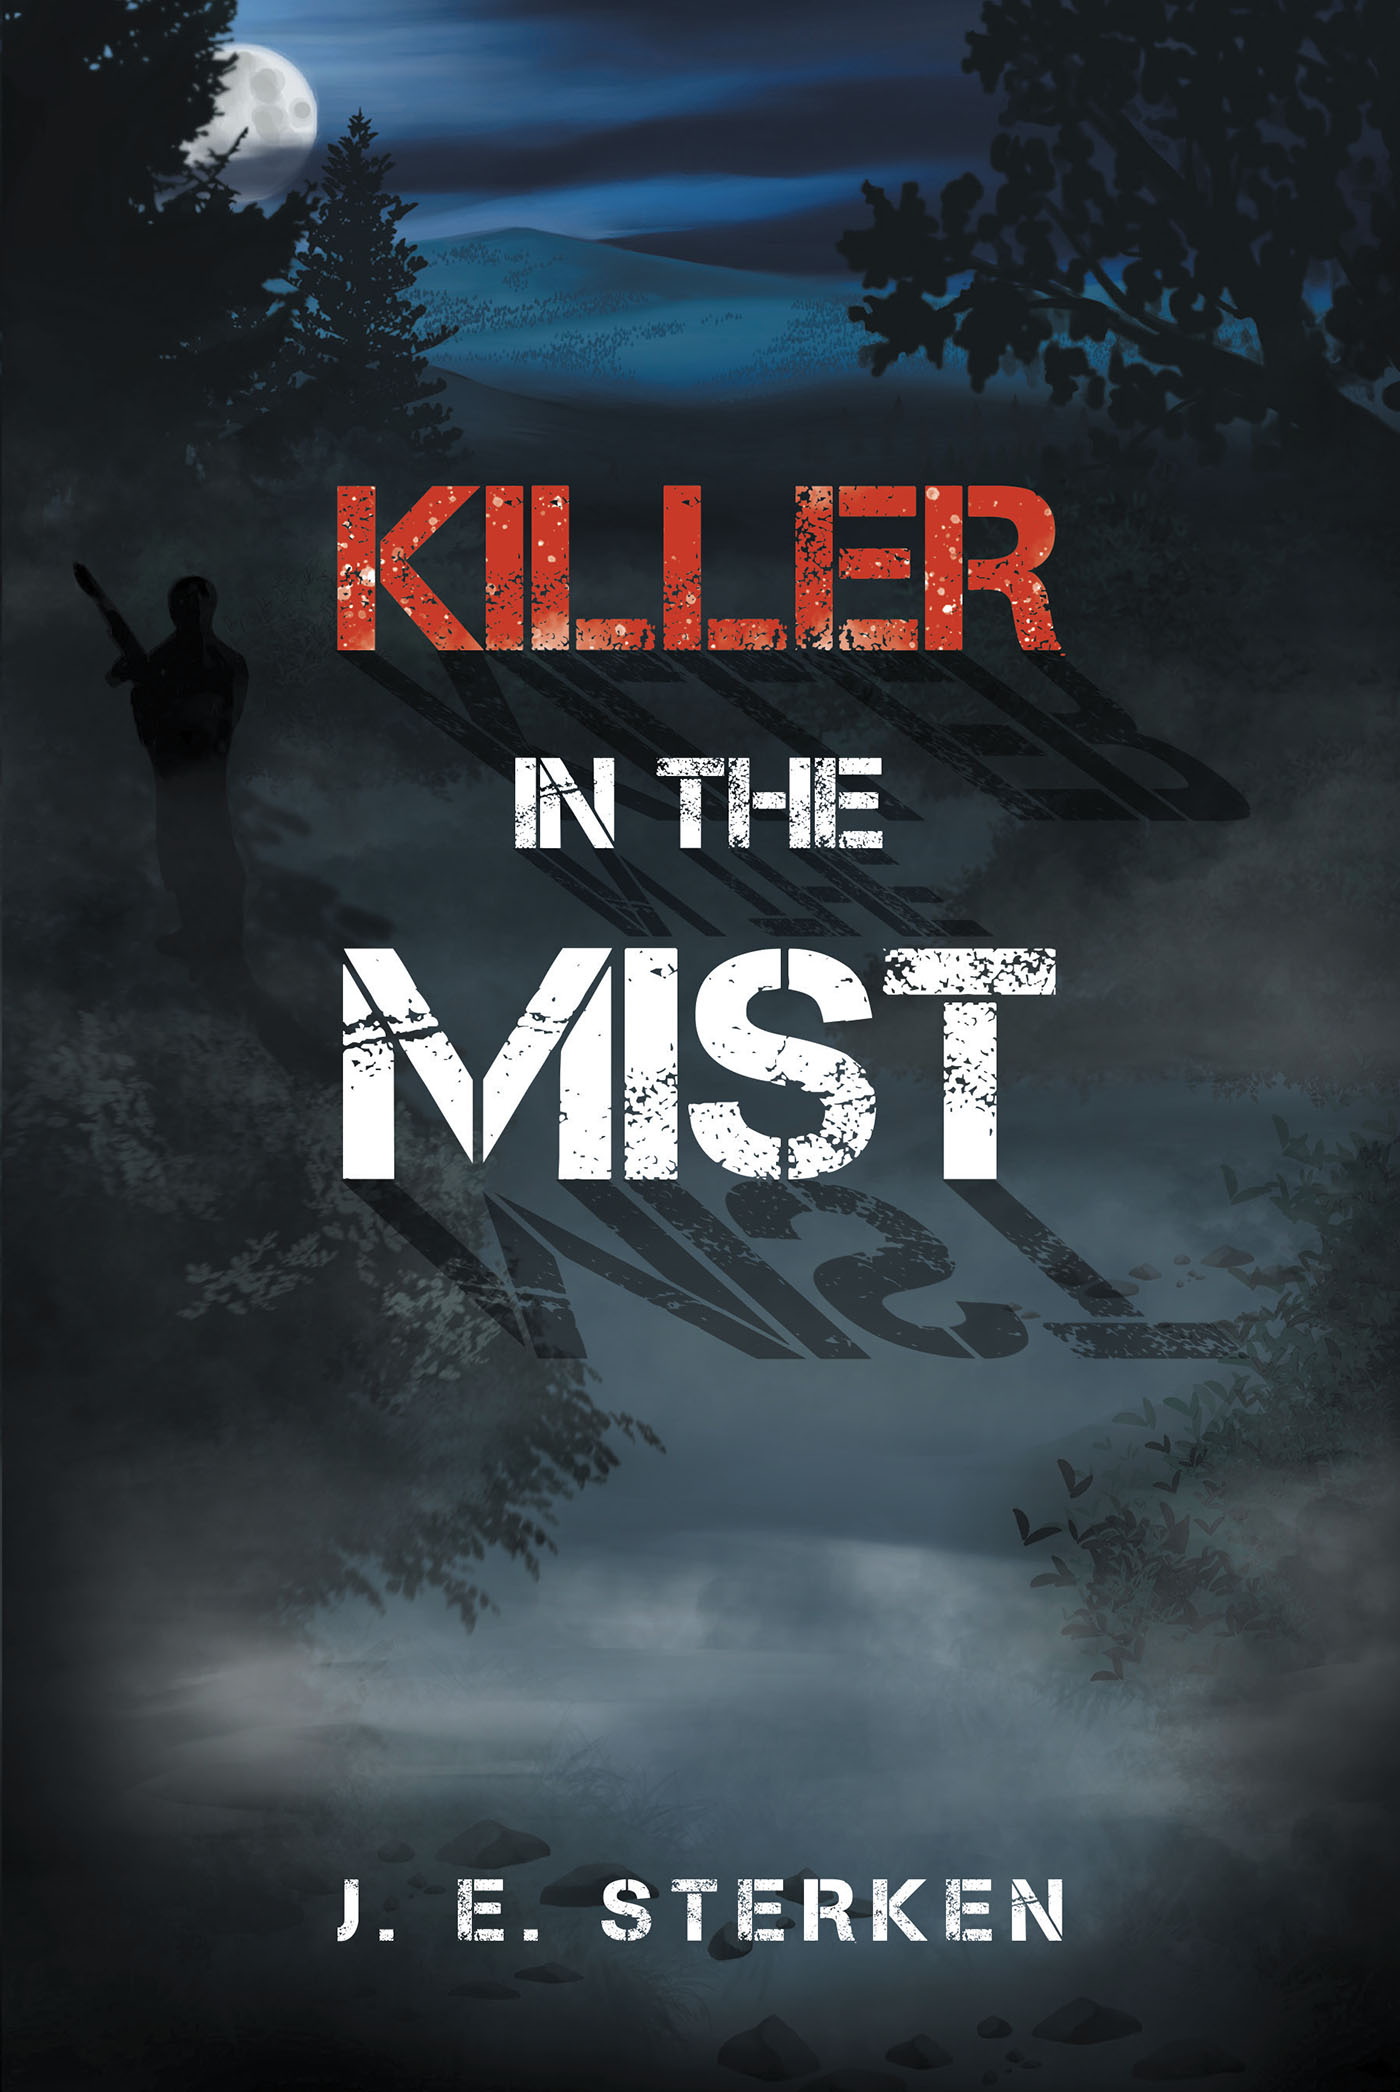 Author J. E. Sterken’s New Book, "Killer in the Mist," Follows a Small-Town Deputy Who Must Find the Perpetrator of a Series of Crimes, One of Which Turns Personal